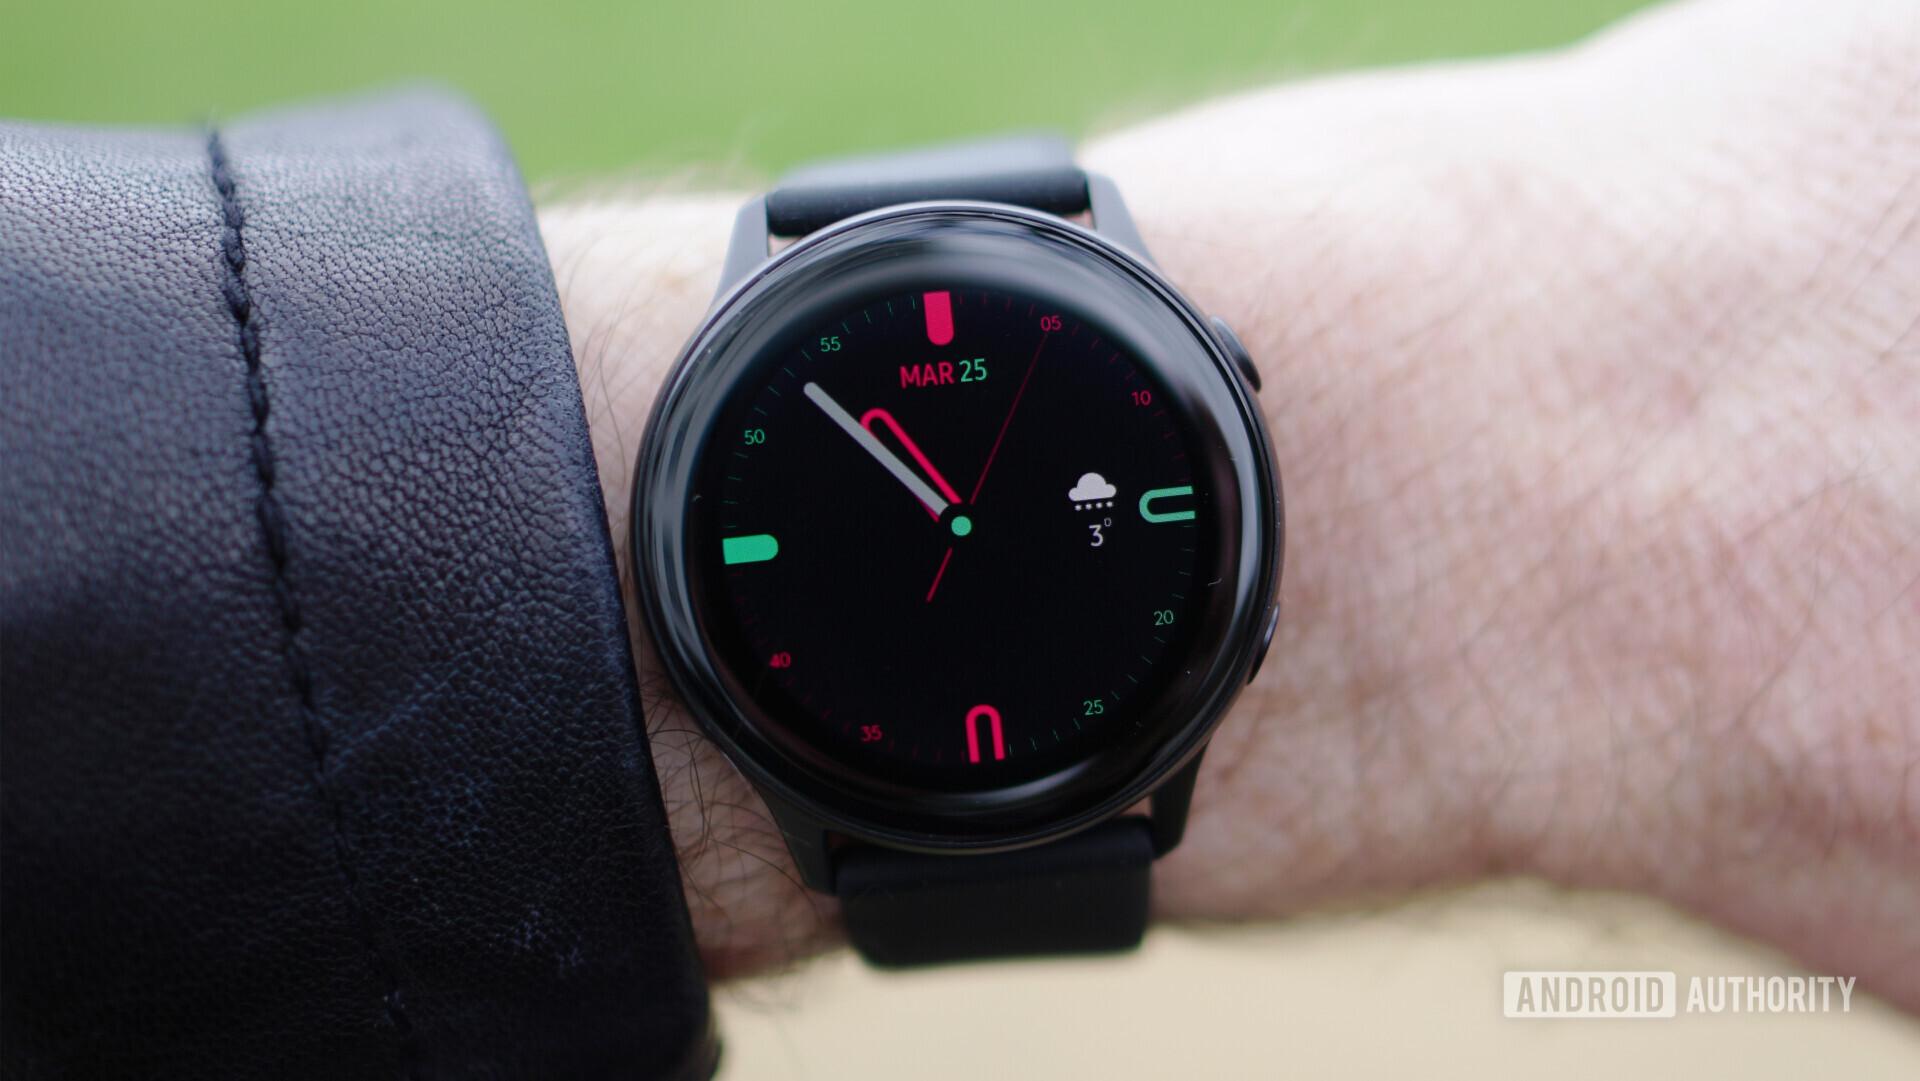 Samsung Galaxy Watch Active review: great hardware let down